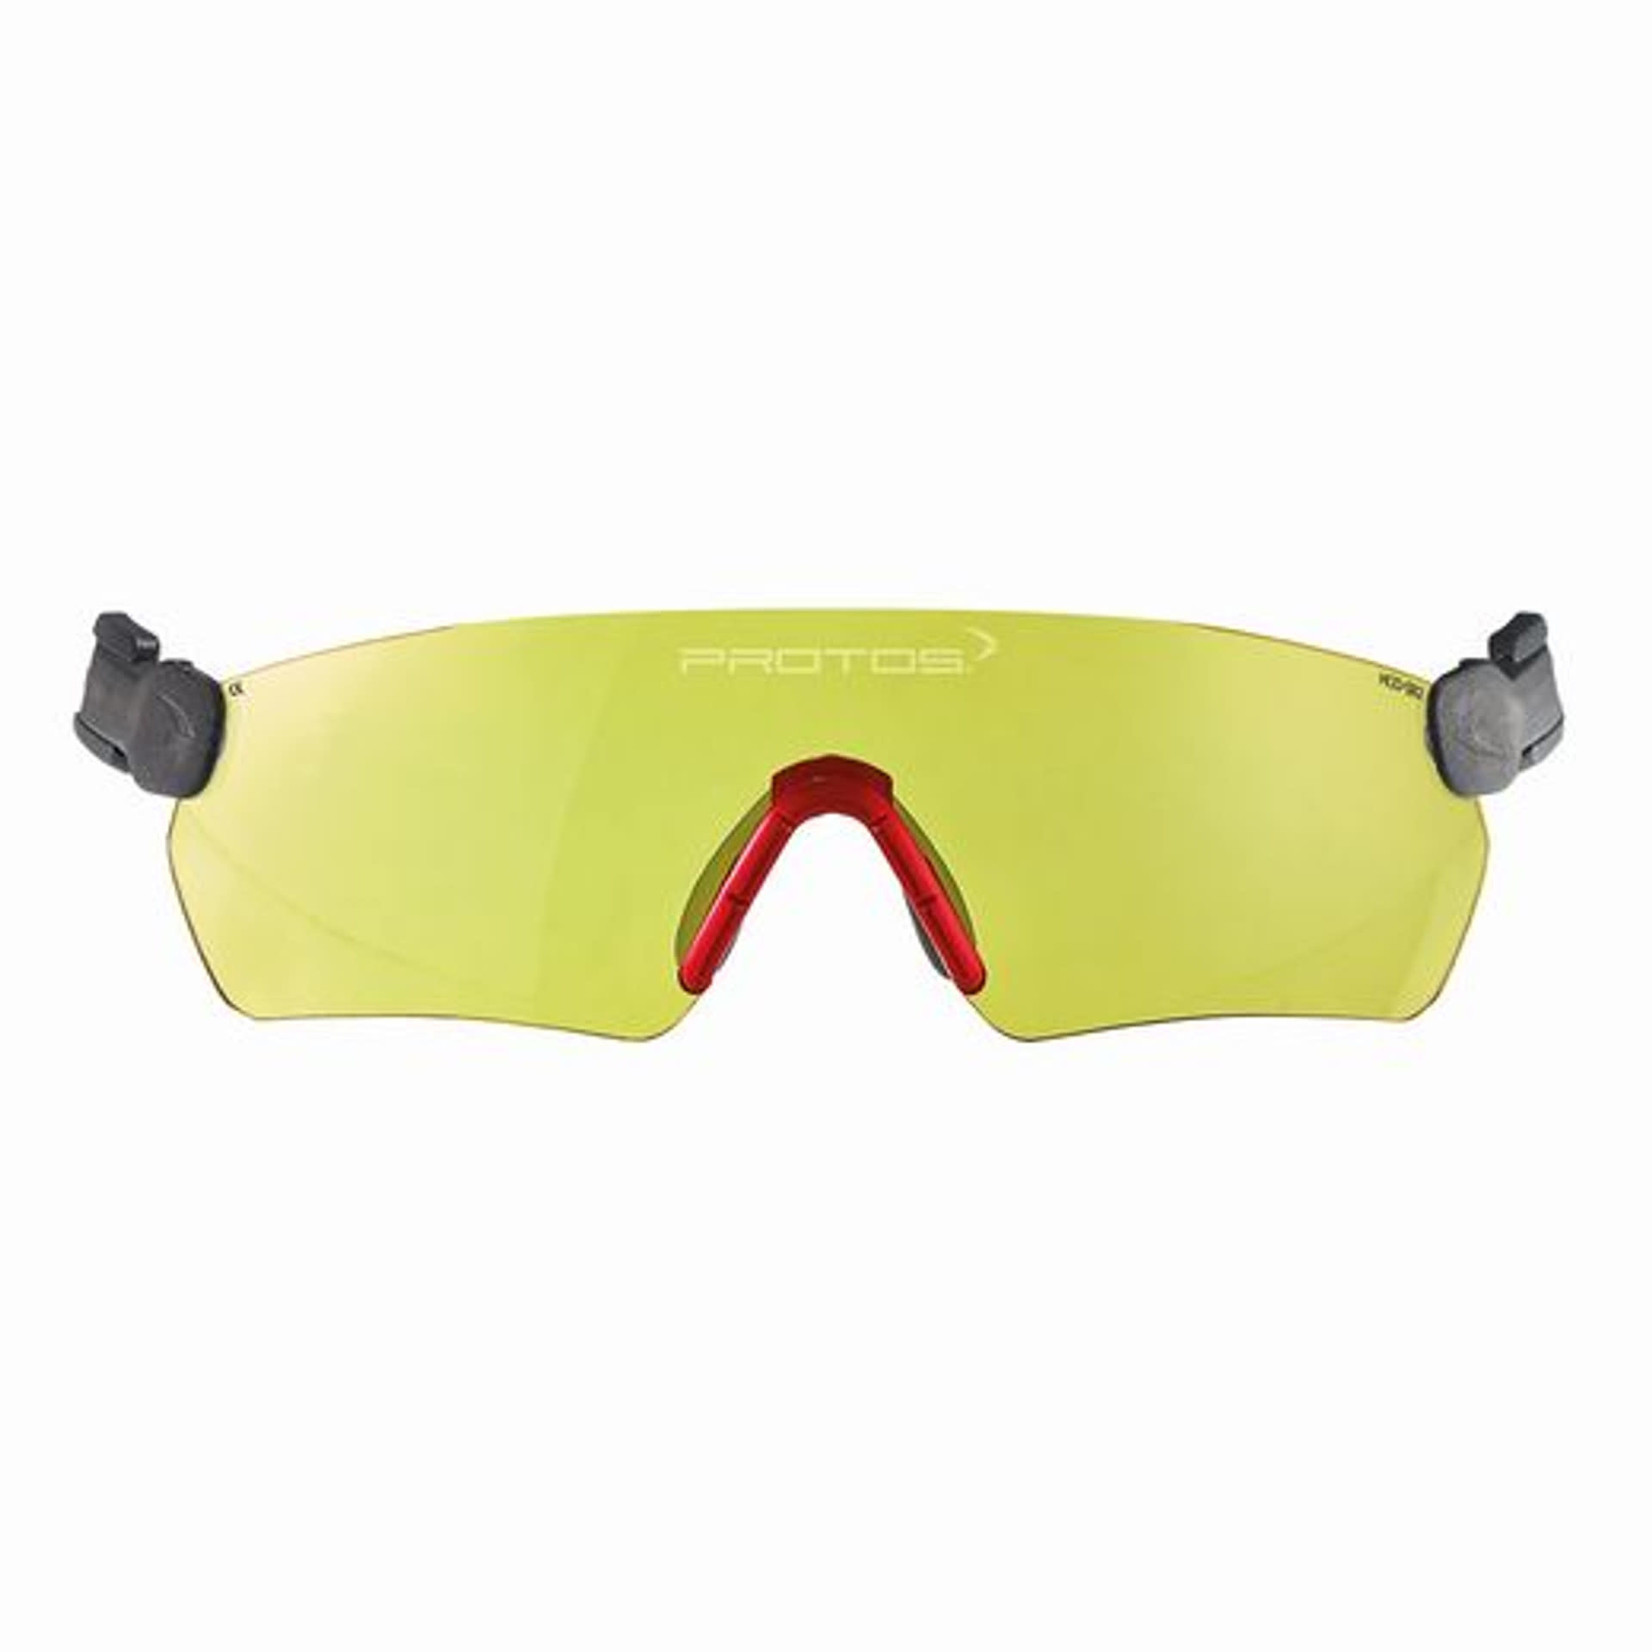 PROTOS Pfanner Protos Integrated Glasses